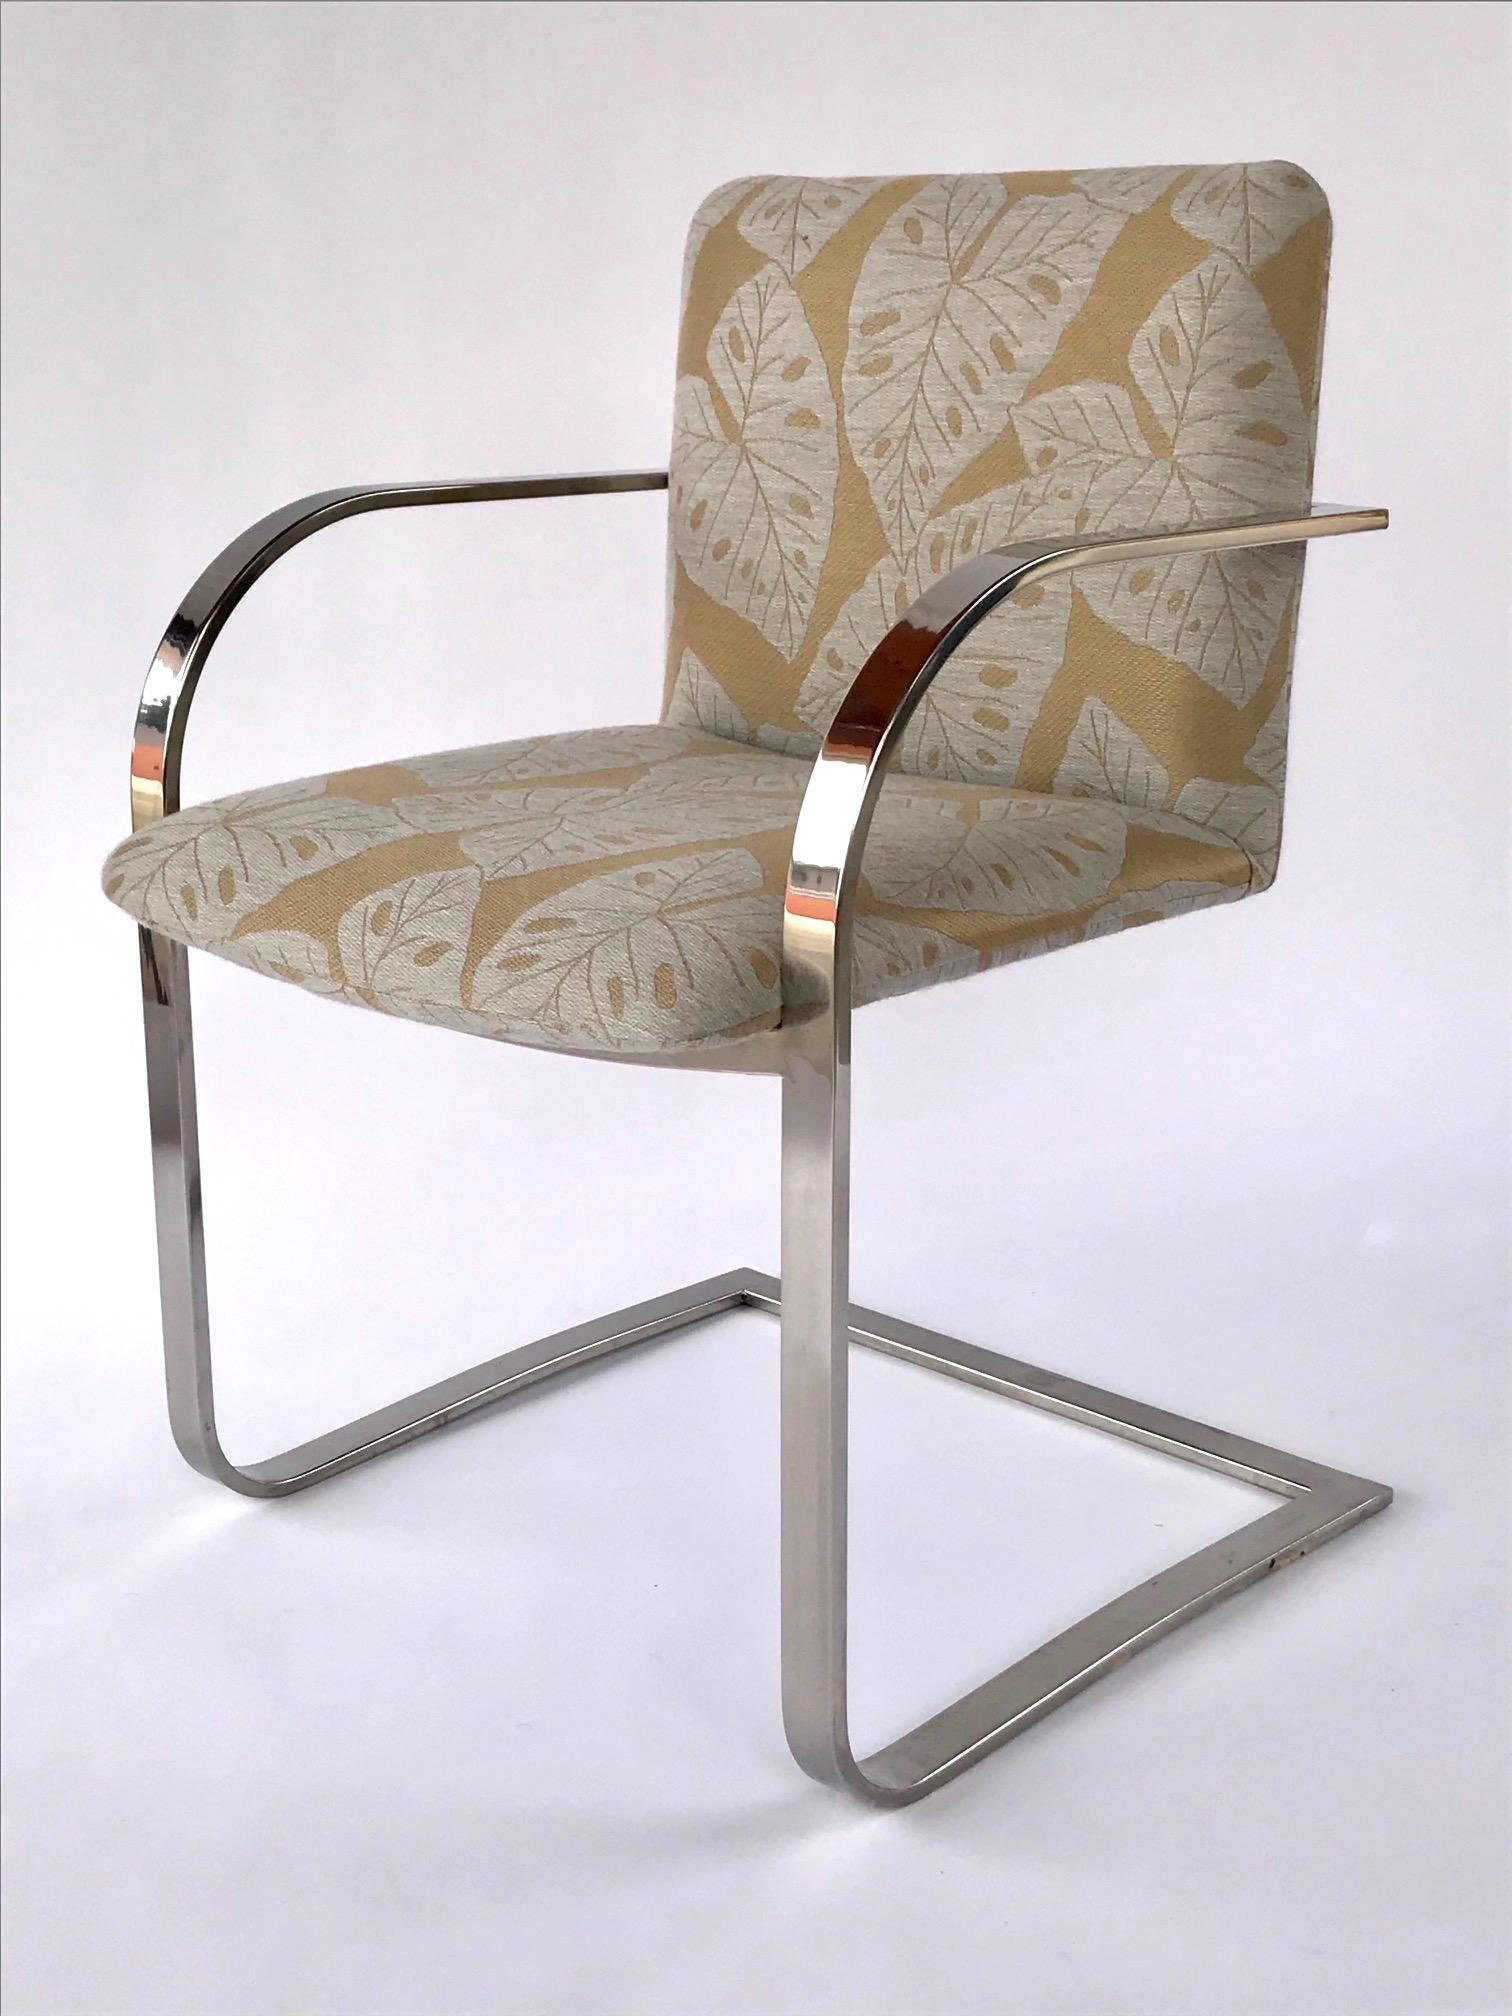 American Pair of Mid-Century Modern Chrome Desk Chairs with Tropical Print by Brueton